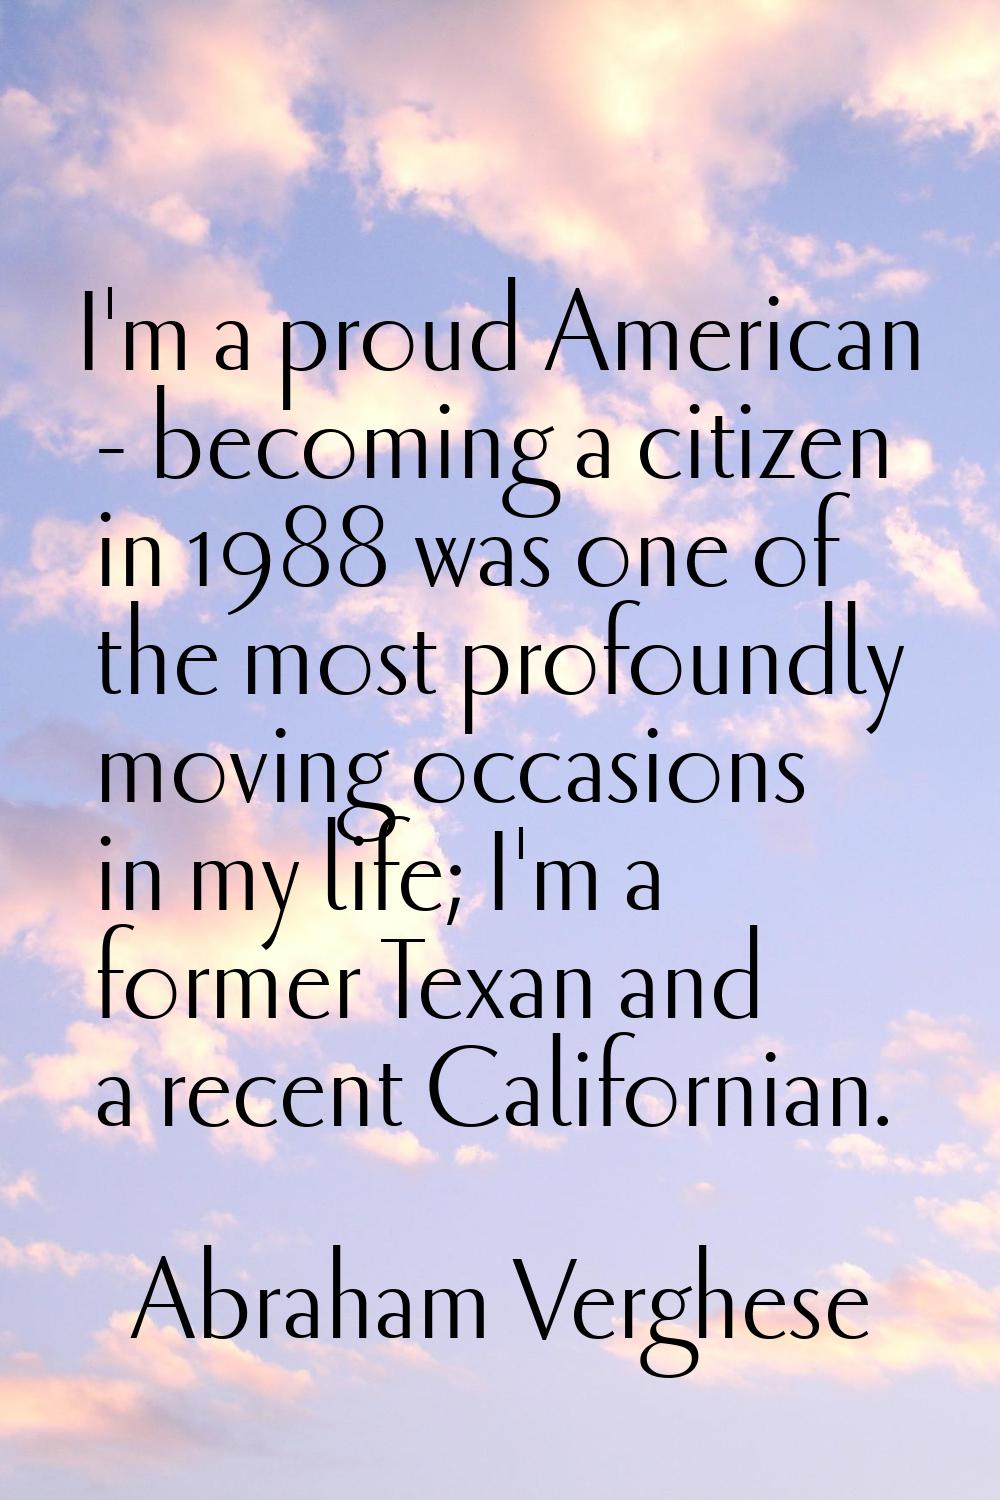 I'm a proud American - becoming a citizen in 1988 was one of the most profoundly moving occasions i